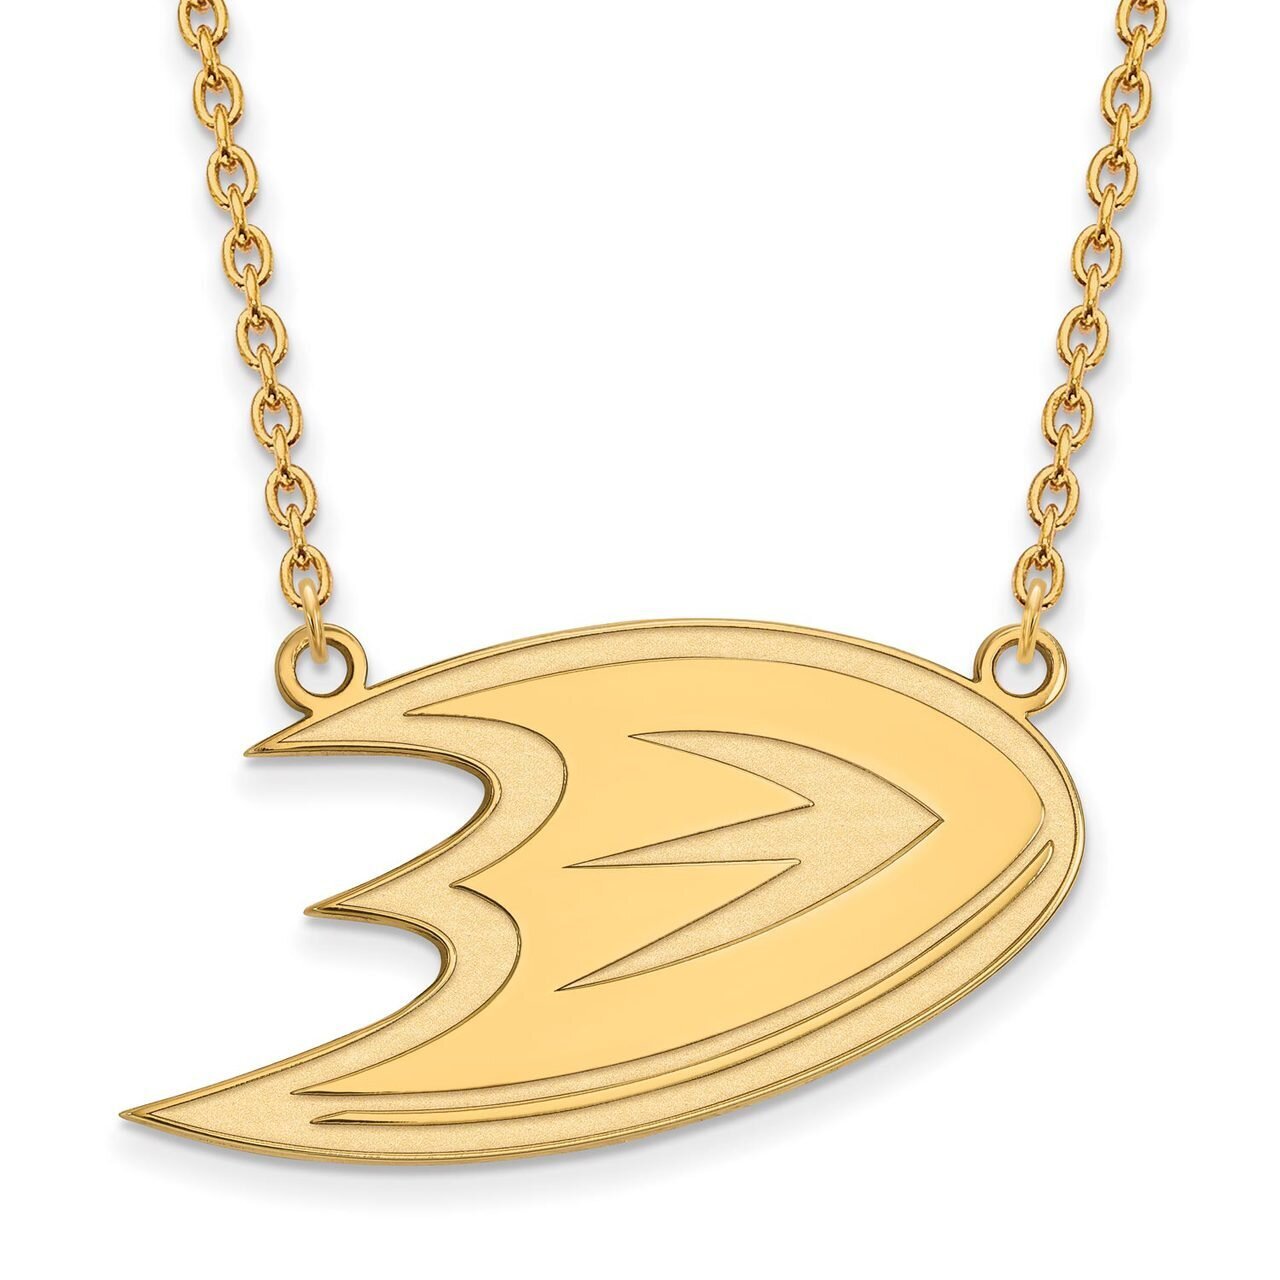 Anaheim Ducks Large Pendant with Chain Necklace 10k Yellow Gold 1Y014MDU-18